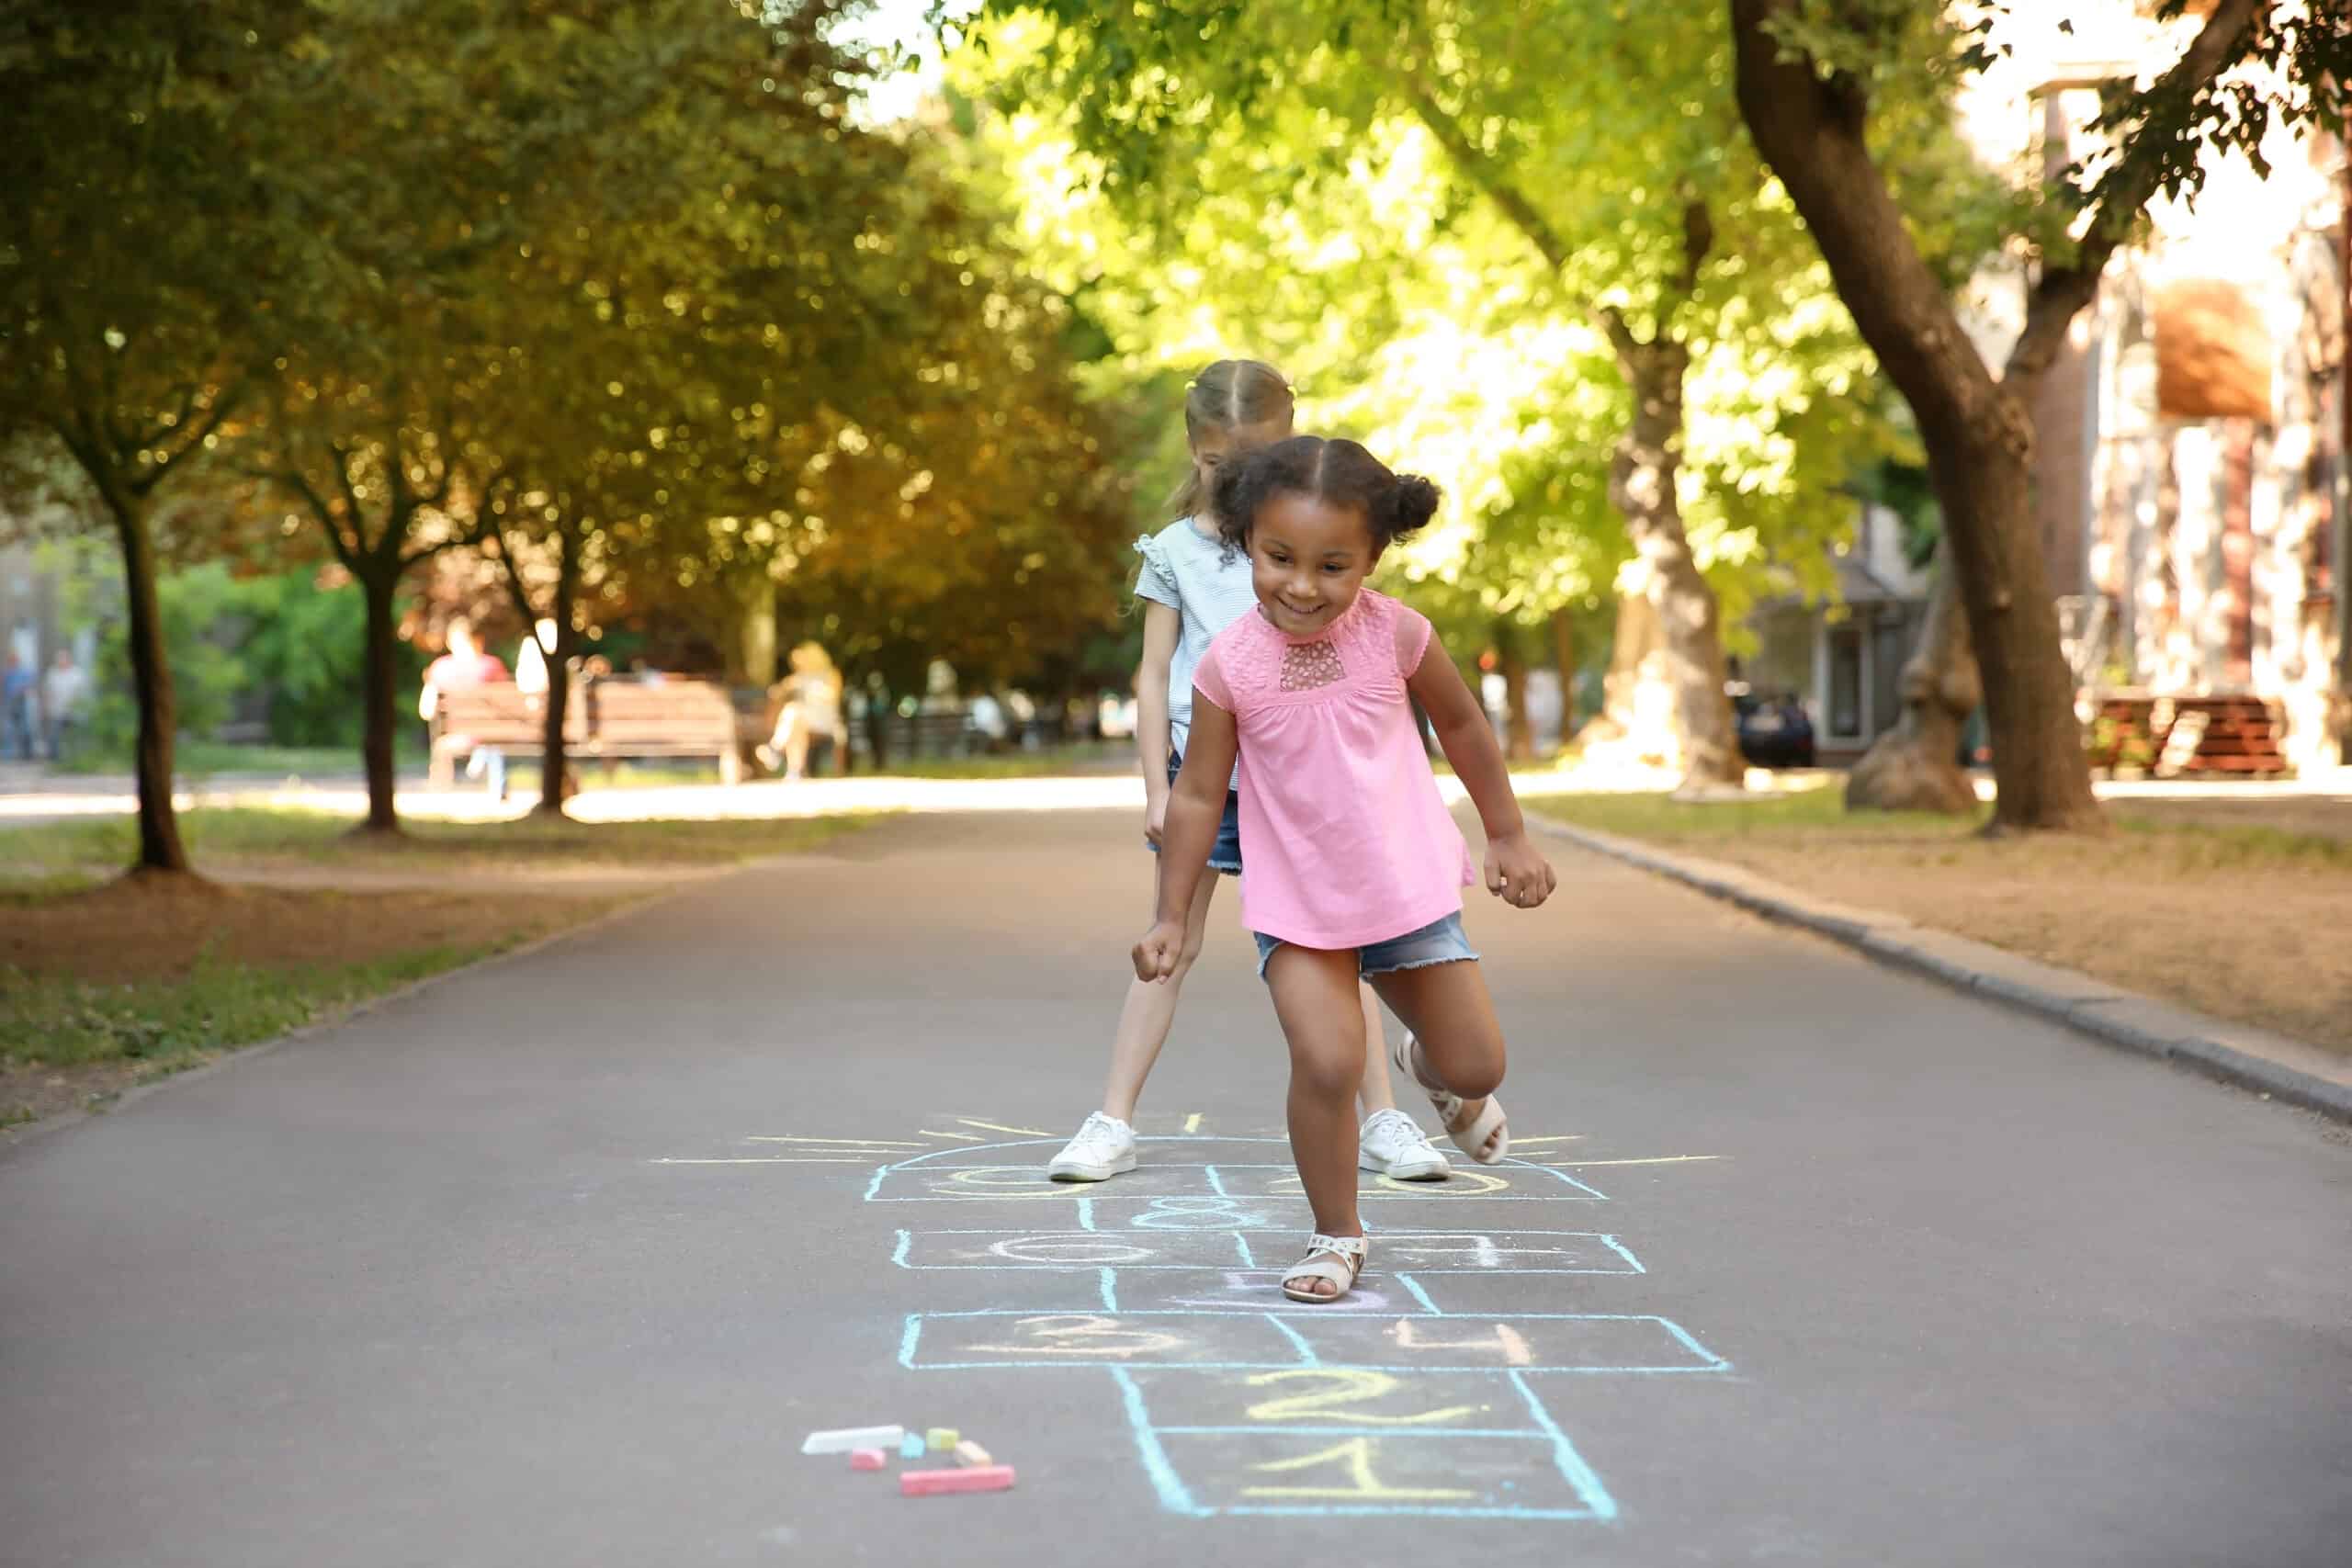 girls playing hopscotch, a classic outdoor game